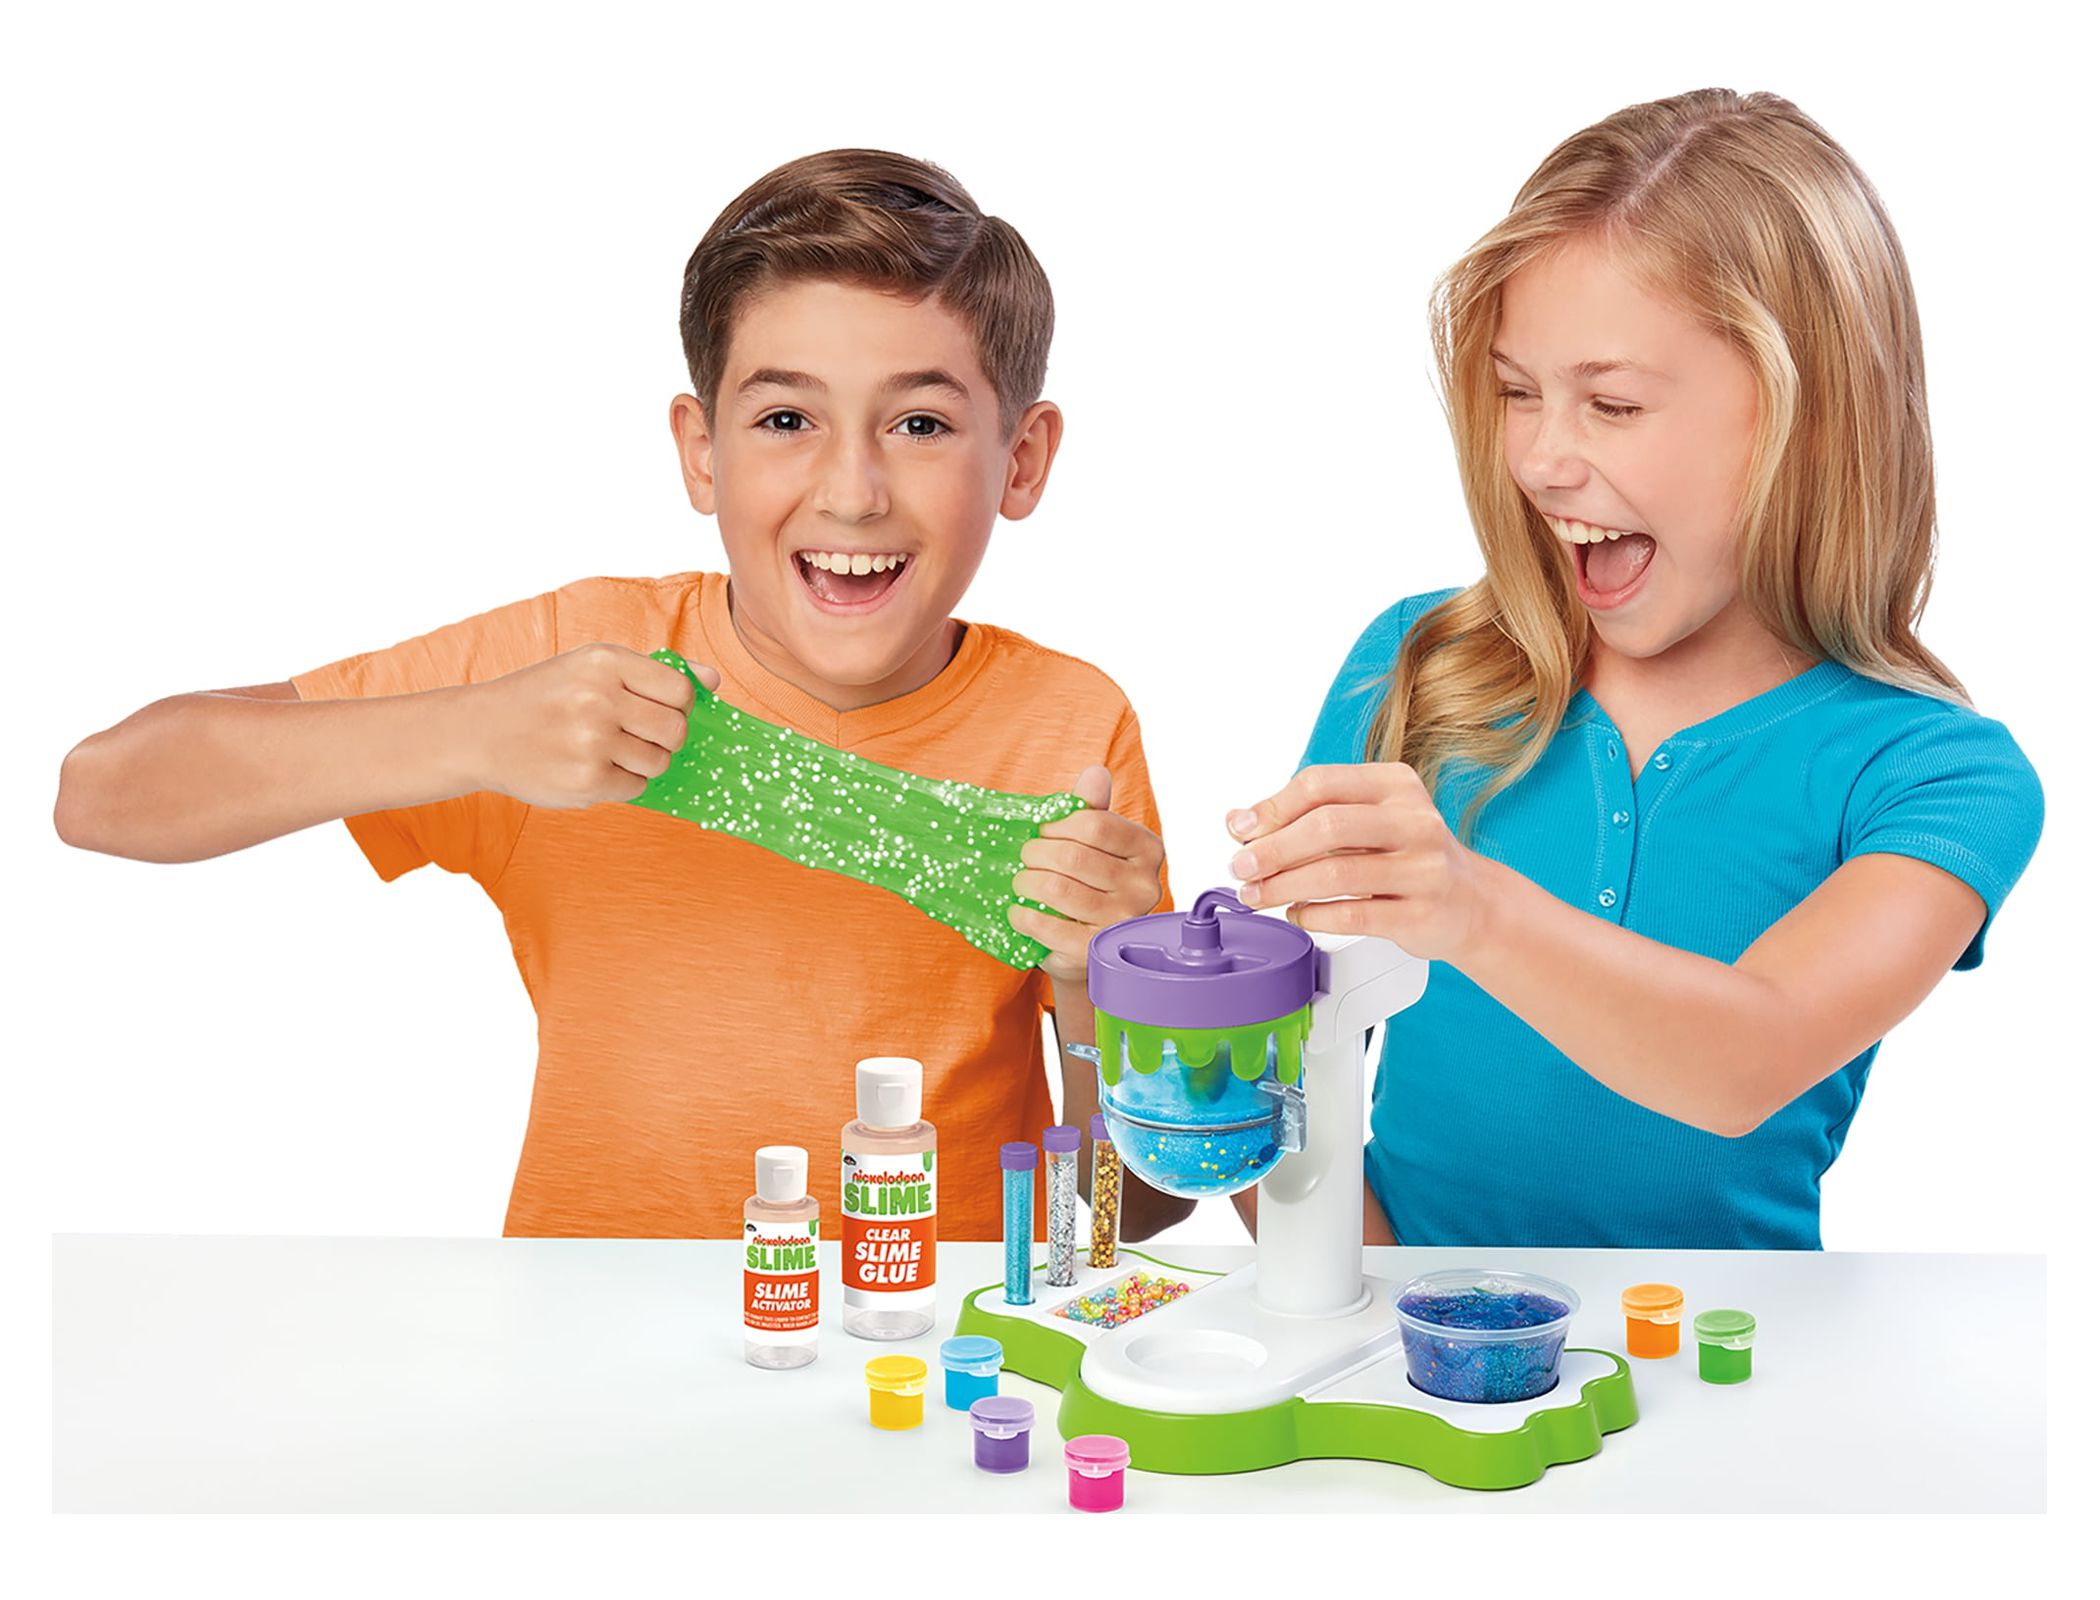 Cra-Z-Art - Nickleodeon Ultimate Slime Making Lab with Tabletop Mixer - image 11 of 12